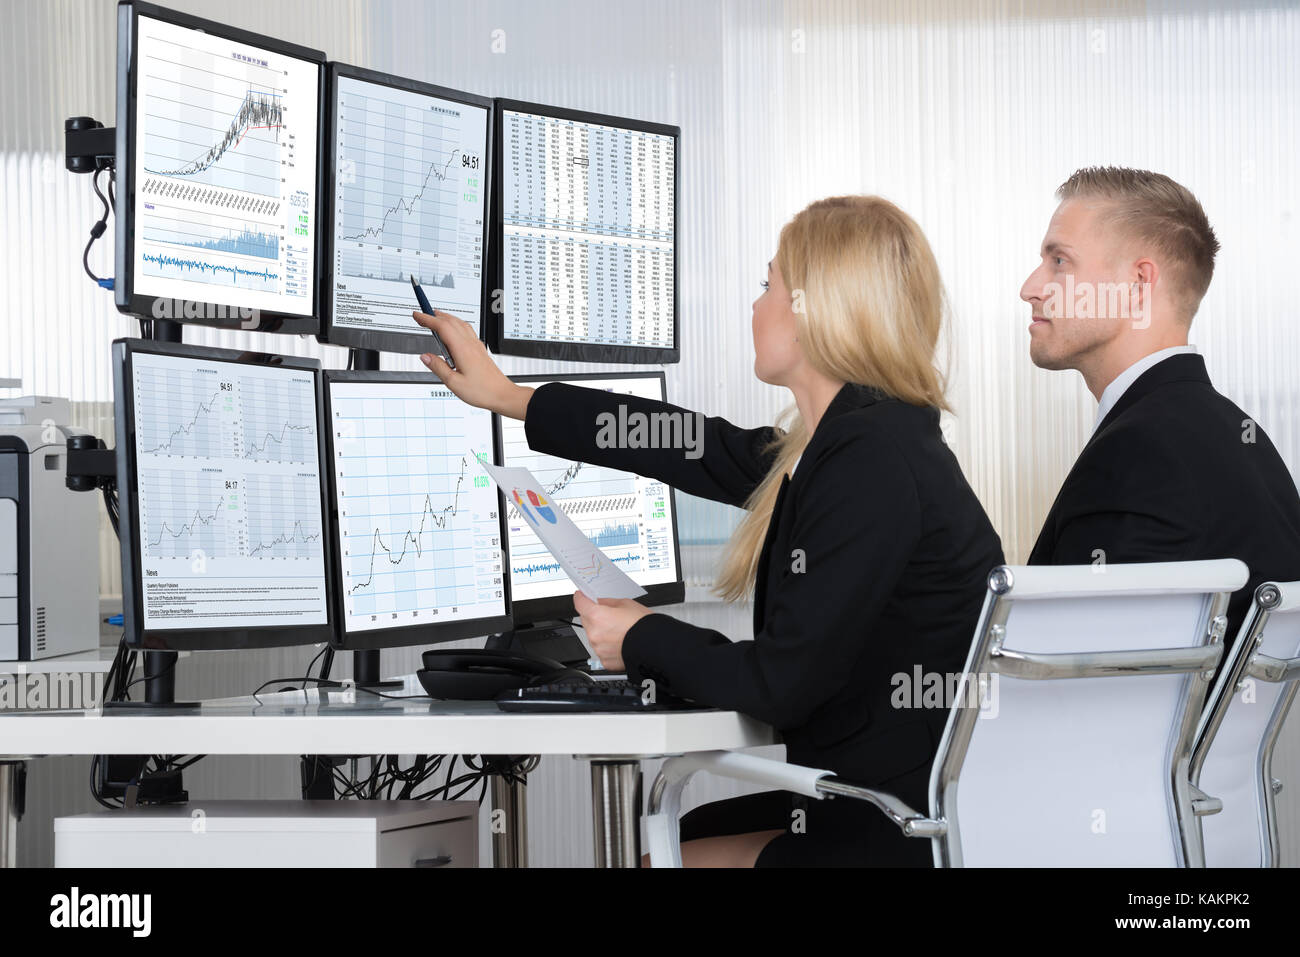 Financial workers analyzing data displayed on computer screens at desk in office Stock Photo